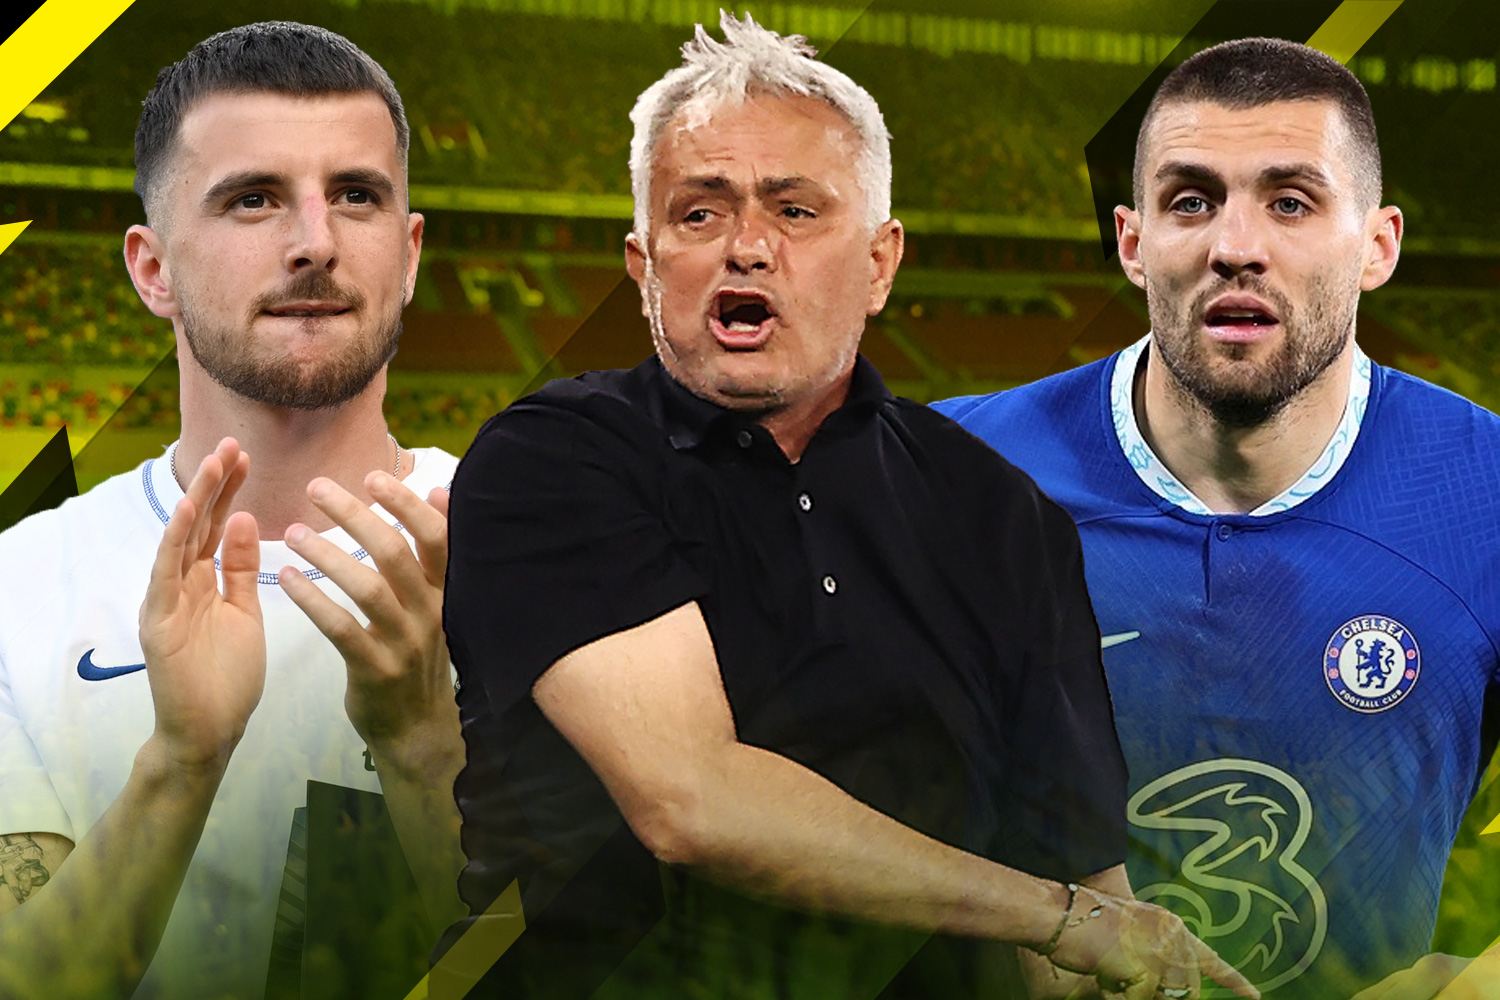 Football news LIVE: Mourinho confronts English ref in car park, Mount agrees Man United terms, Kovacic set to swap Chelsea for Man City